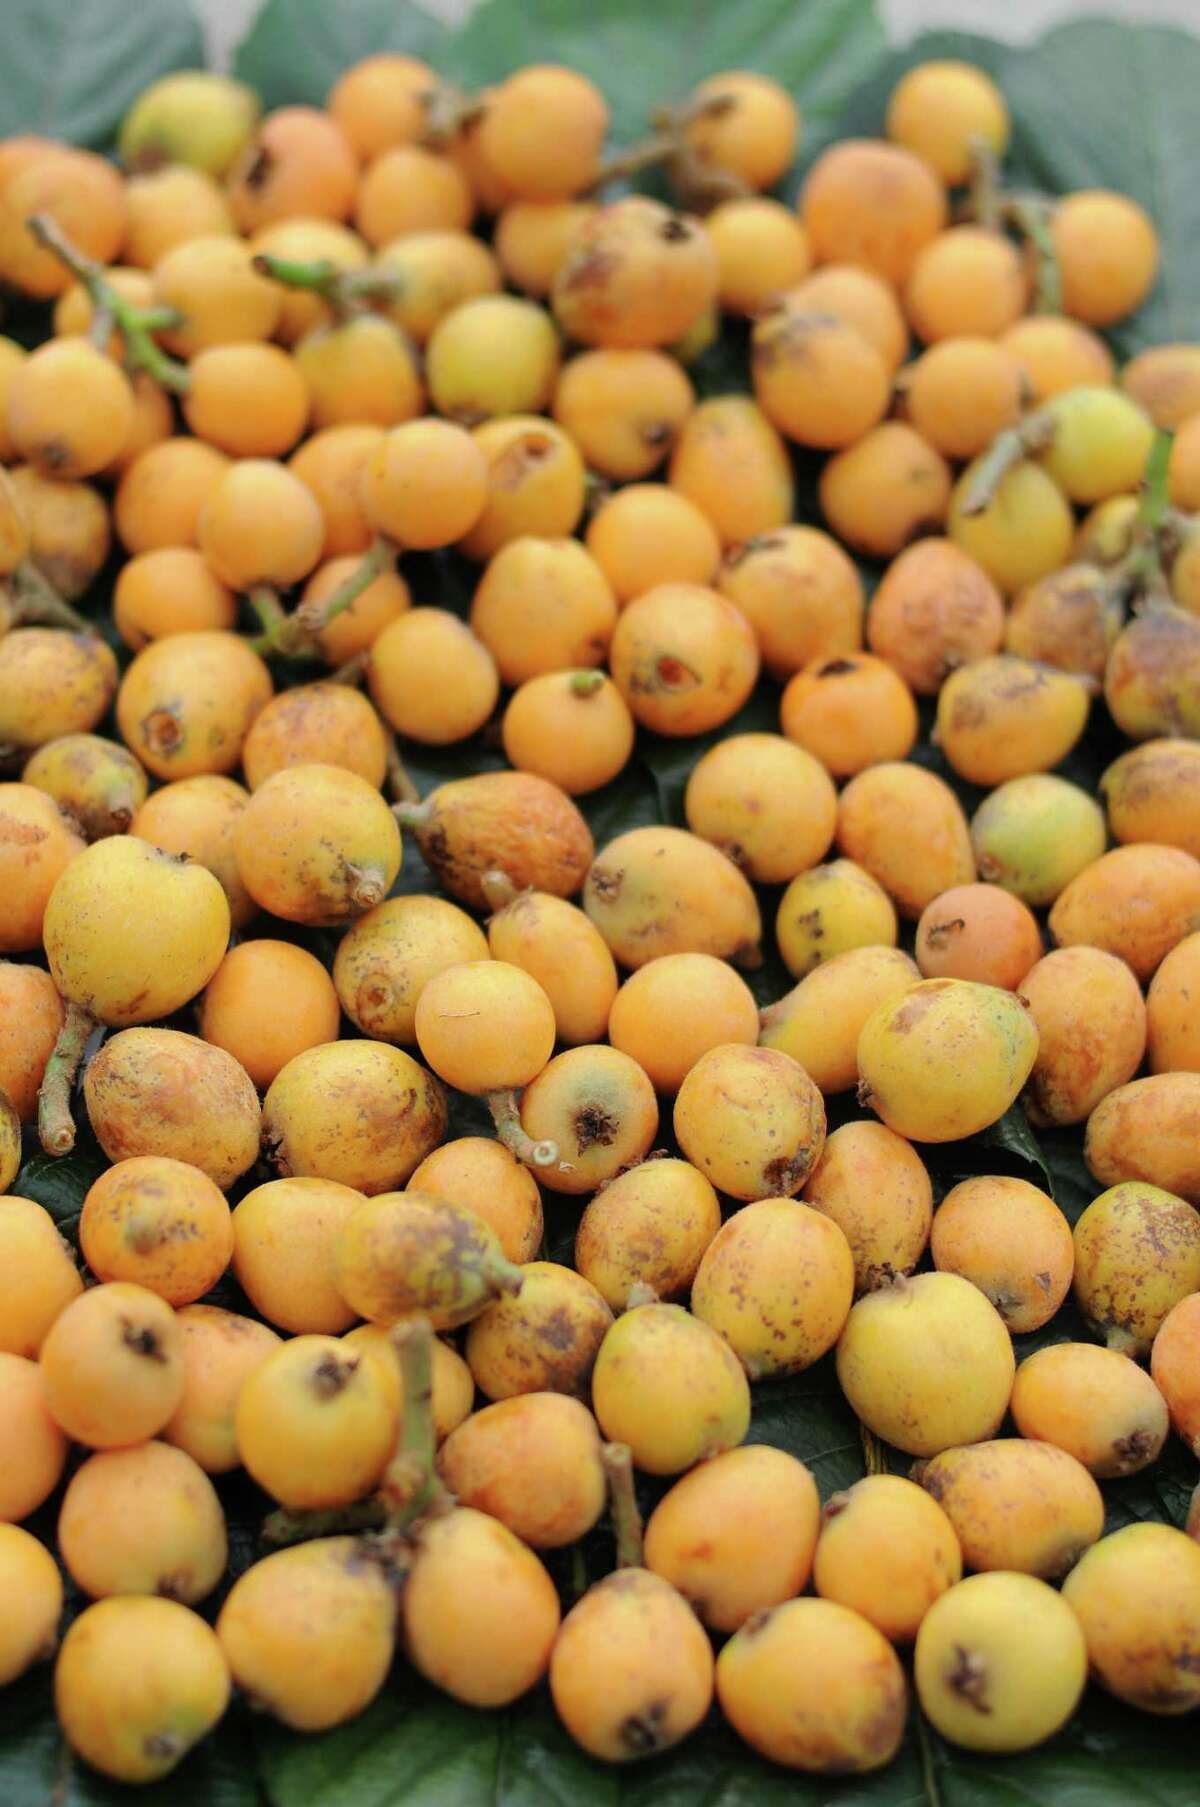 3. Loquat season runs from early April to early May in San Antonio.